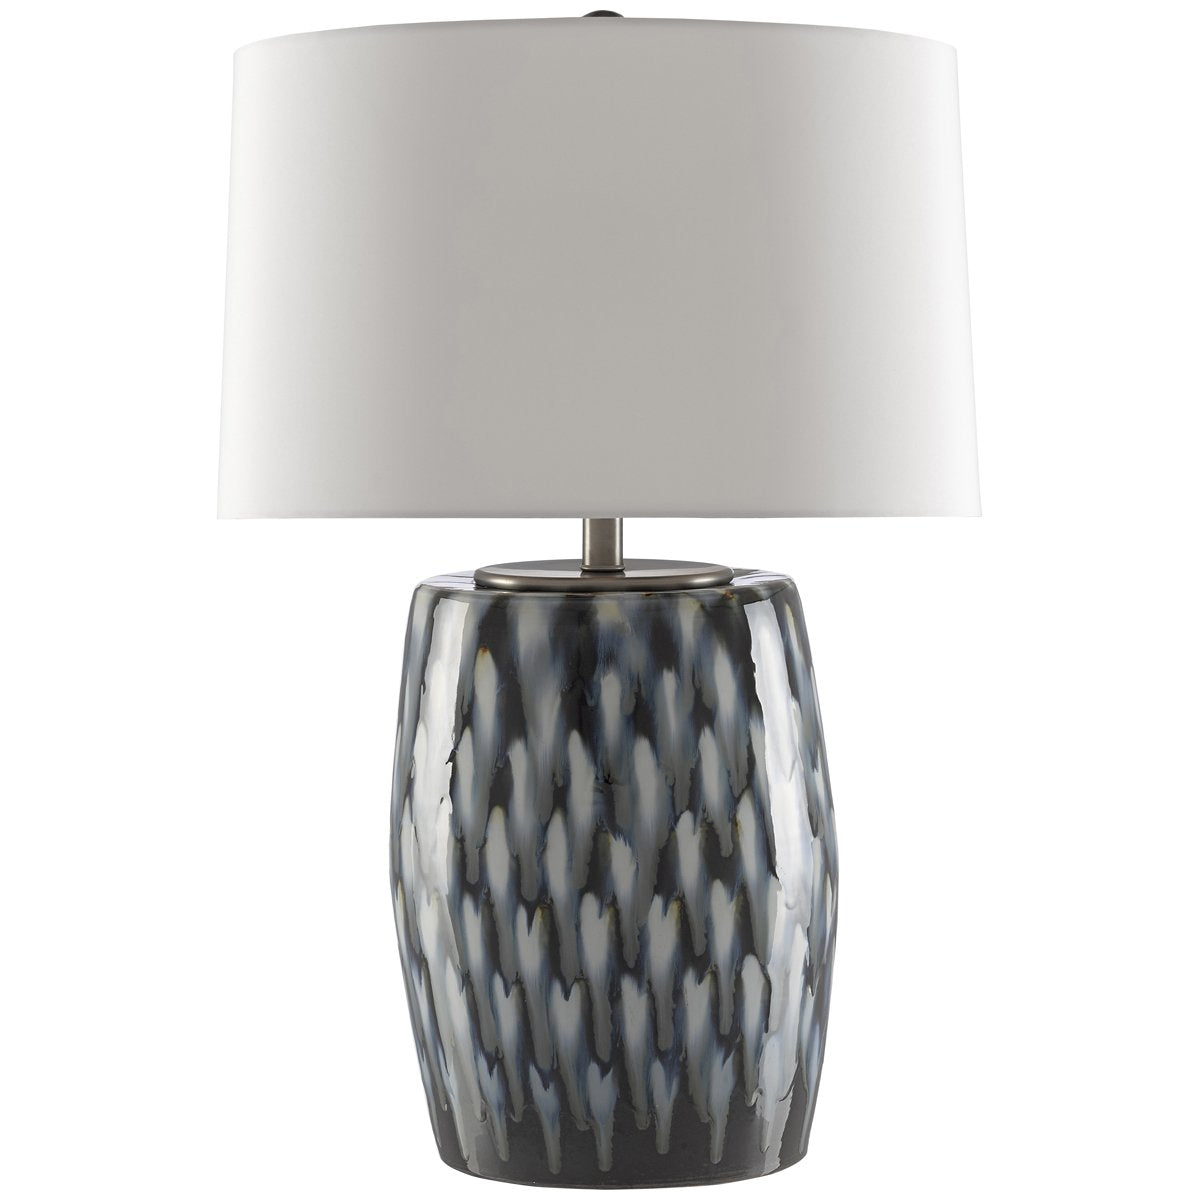 Currey and Company Milner Blue Table Lamp